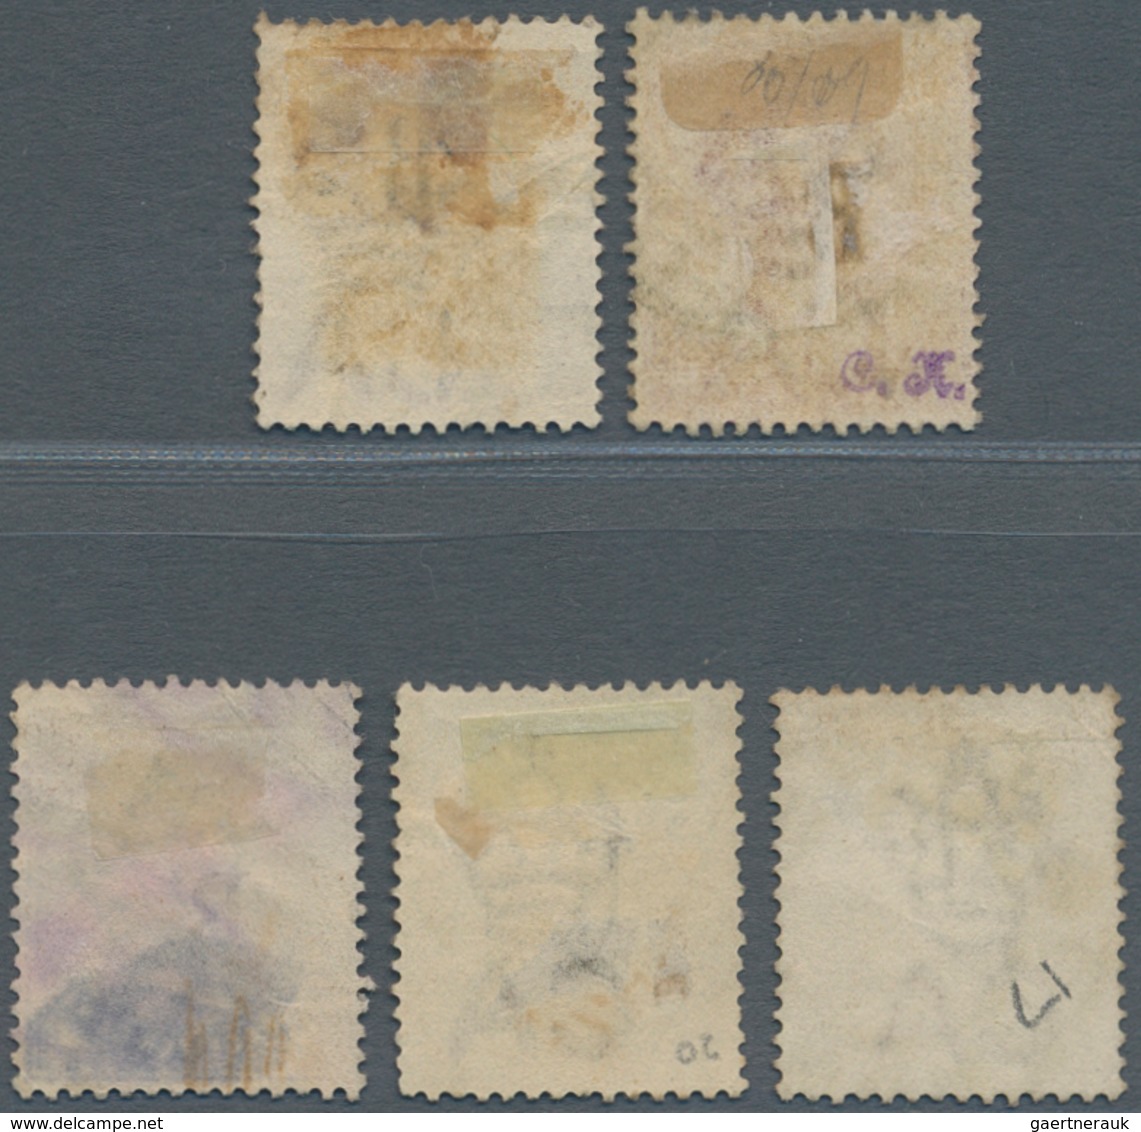 Malaiische Staaten - Straits Settlements - Post In Bangkok: 1882-85, Group Of Five Used Stamps Optd. - Straits Settlements